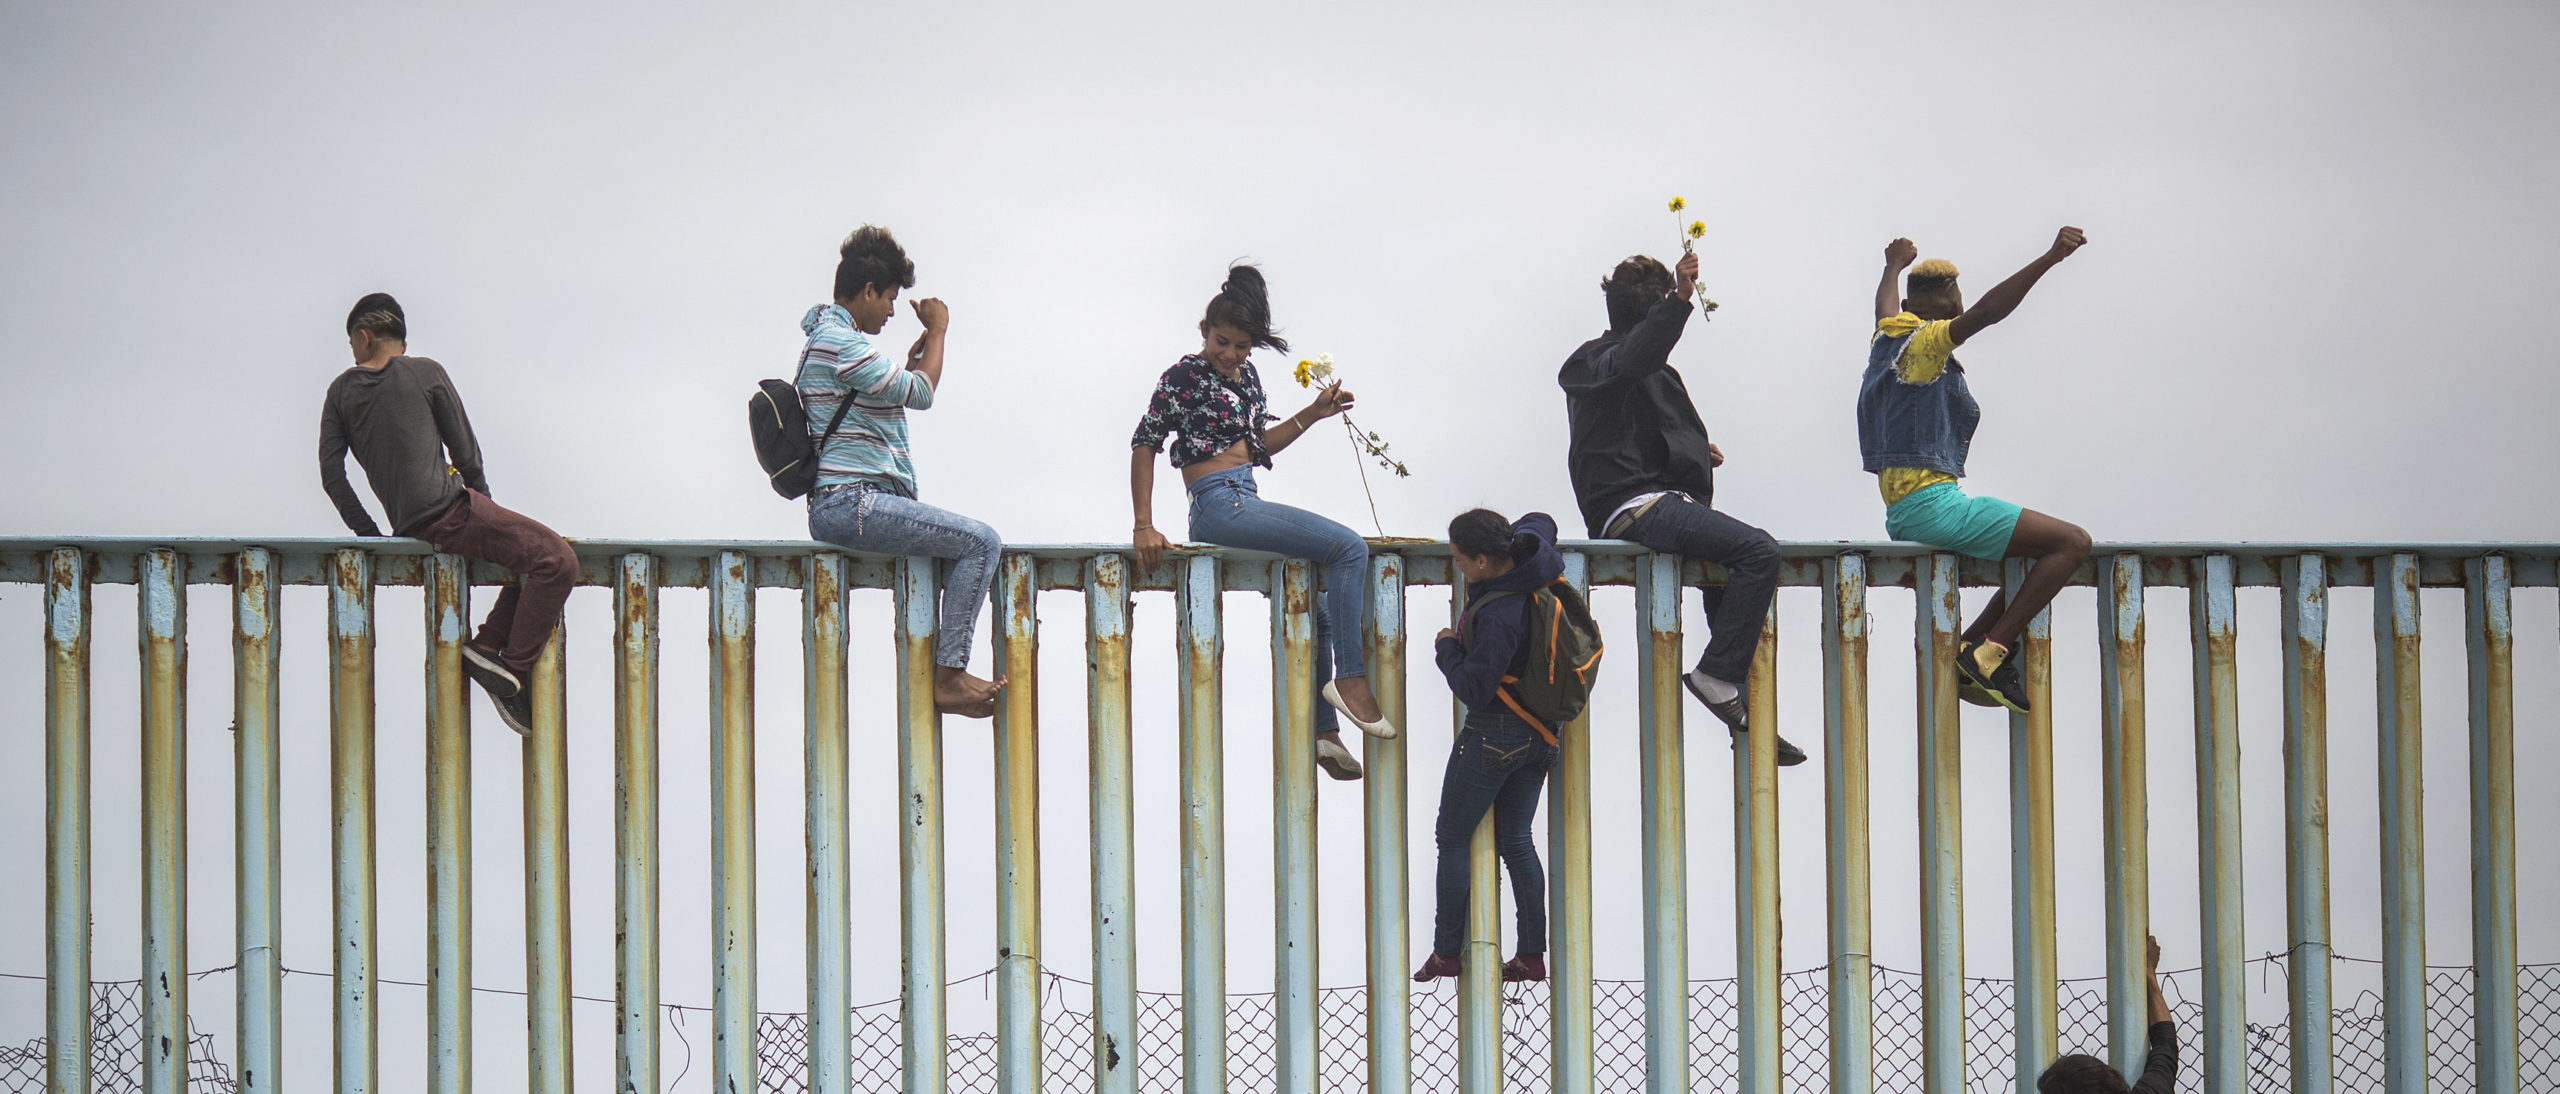 TIJUANA, MEXICO - APRIL 29: People climb a section of border fence to look toward supporters in the U.S. as members of a caravan of Central American asylum seekers arrive to a rally on April 29, 2018 in Tijuana, Baja California Norte, Mexico. More than 300 immigrants, the remnants of a caravan of Central Americans that journeyed across Mexico to ask for asylum in the United States, have reached the border to apply for legal entry. (Photo by David McNew/Getty Images)